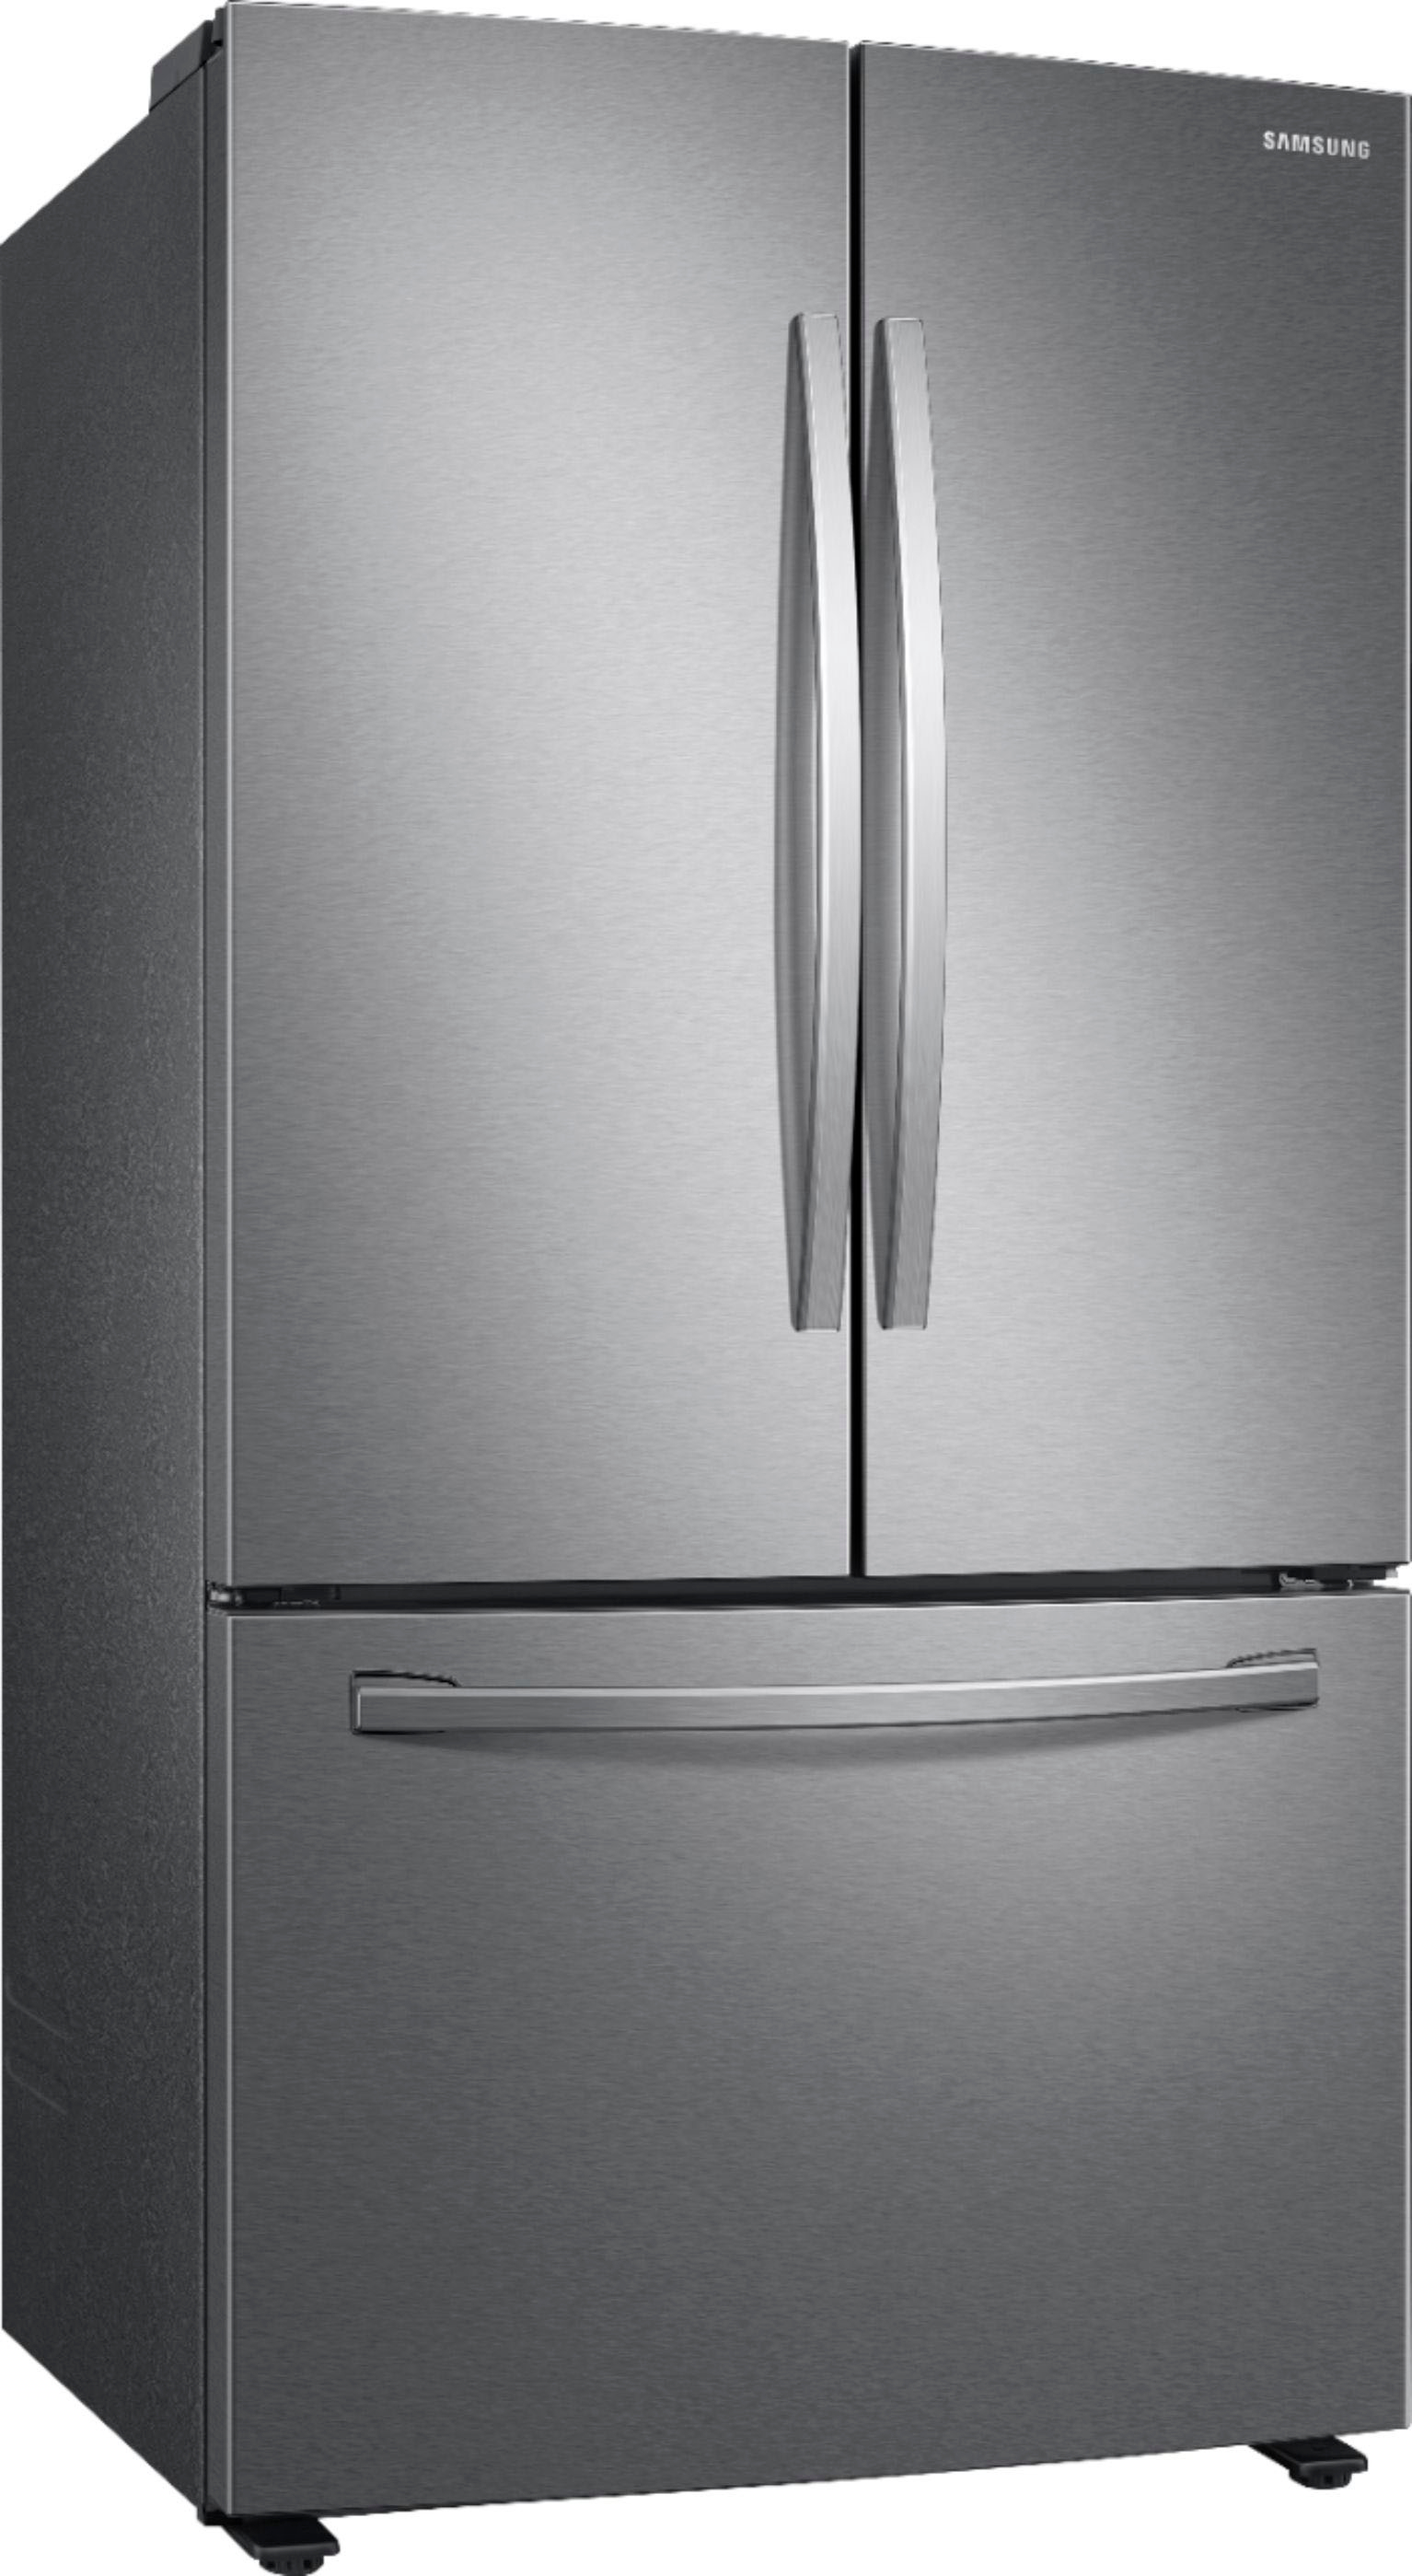 Angle View: Samsung - Geek Squad Certified Refurbished 28 cu. ft. Large Capacity 3-Door French Door Refrigerator - Stainless steel